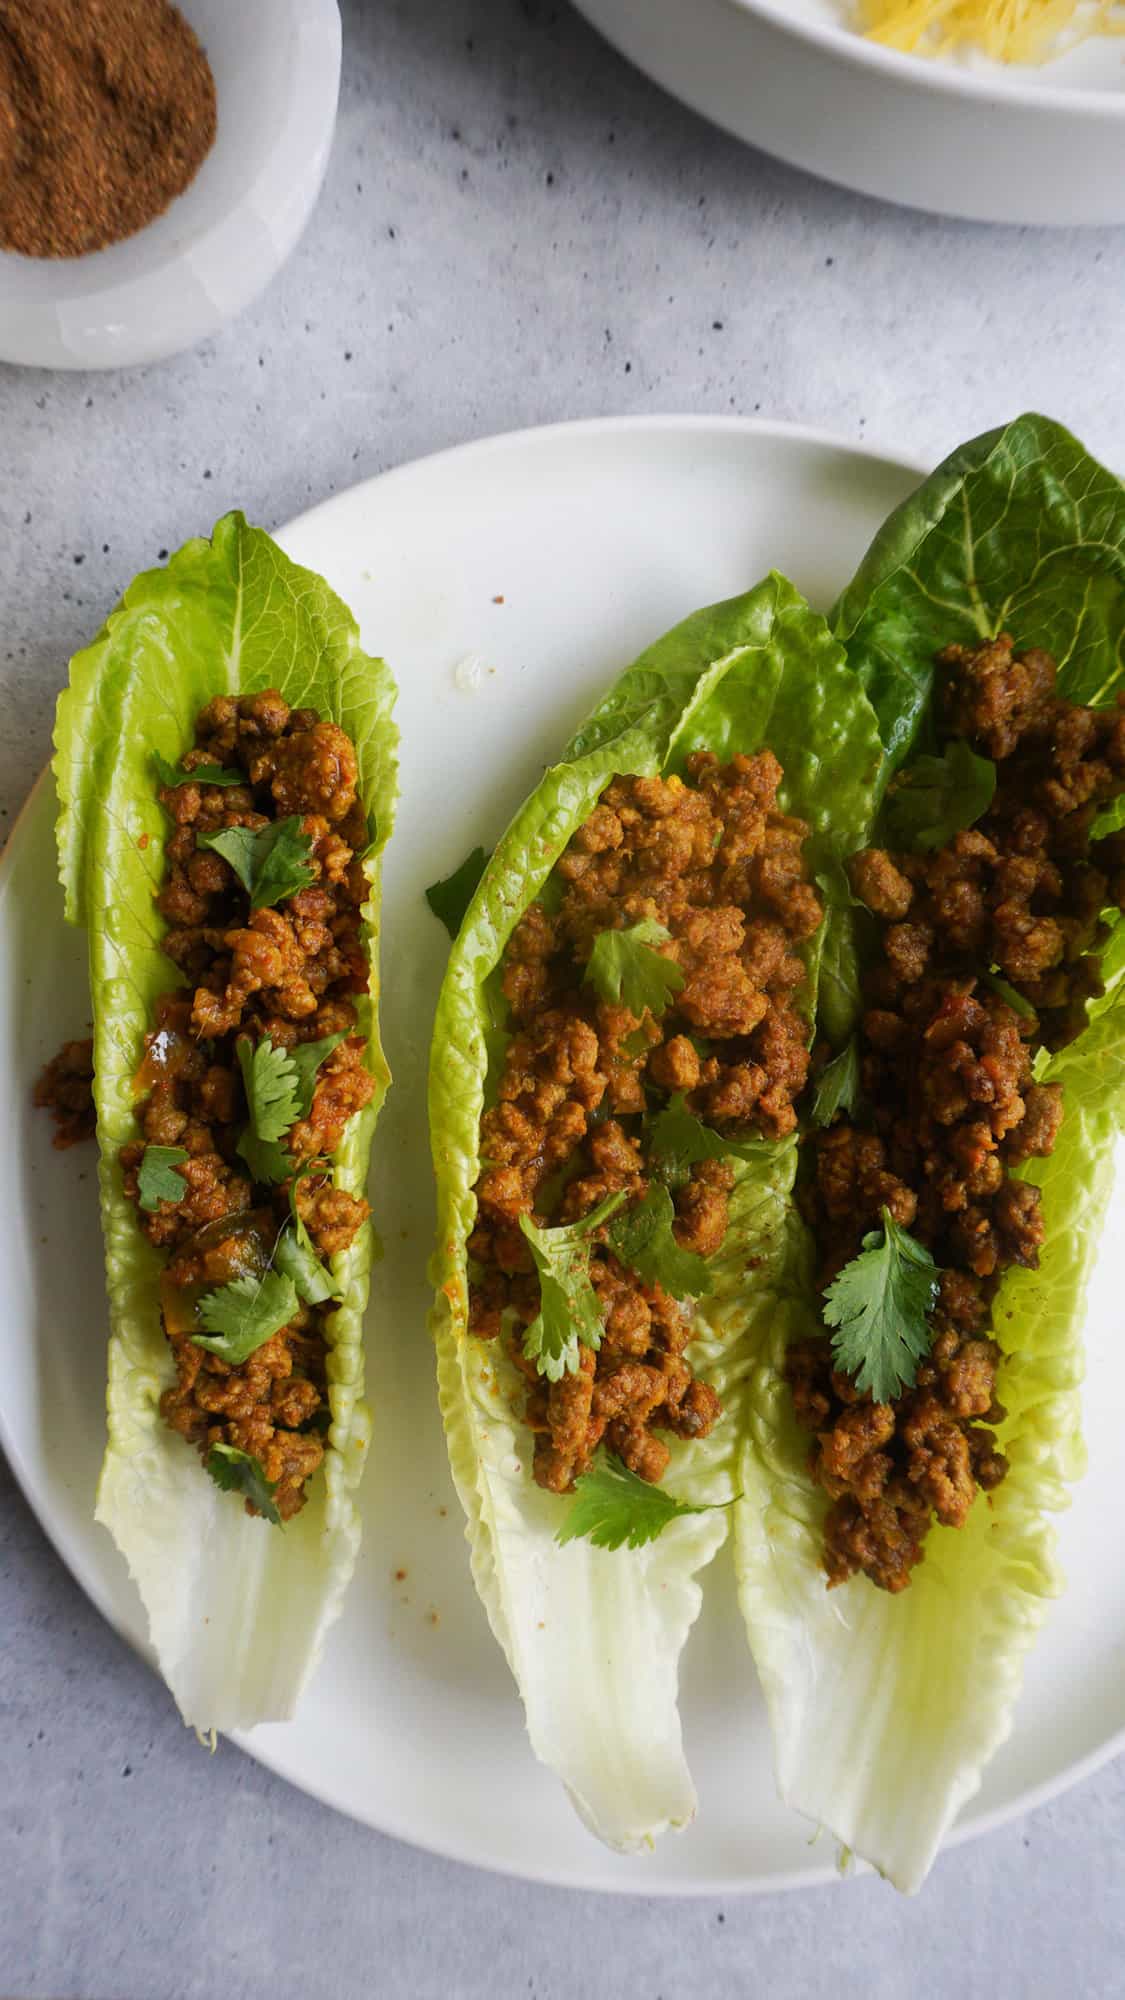 A plate with lettuce cups filled with ground beef